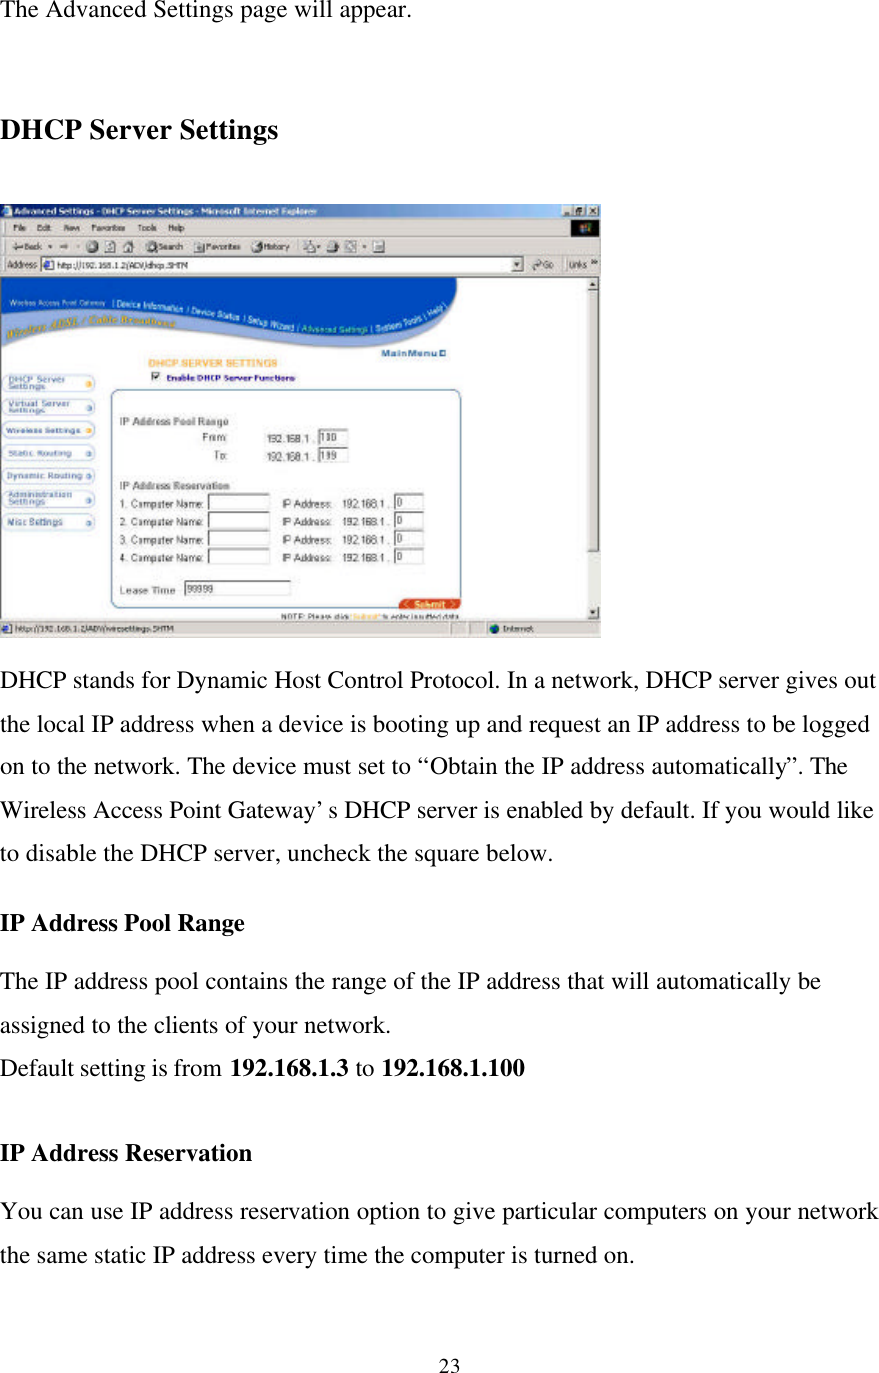 23The Advanced Settings page will appear.DHCP Server SettingsDHCP stands for Dynamic Host Control Protocol. In a network, DHCP server gives outthe local IP address when a device is booting up and request an IP address to be loggedon to the network. The device must set to “Obtain the IP address automatically”. TheWireless Access Point Gateway’s DHCP server is enabled by default. If you would liketo disable the DHCP server, uncheck the square below.IP Address Pool RangeThe IP address pool contains the range of the IP address that will automatically beassigned to the clients of your network.Default setting is from 192.168.1.3 to 192.168.1.100IP Address ReservationYou can use IP address reservation option to give particular computers on your networkthe same static IP address every time the computer is turned on.